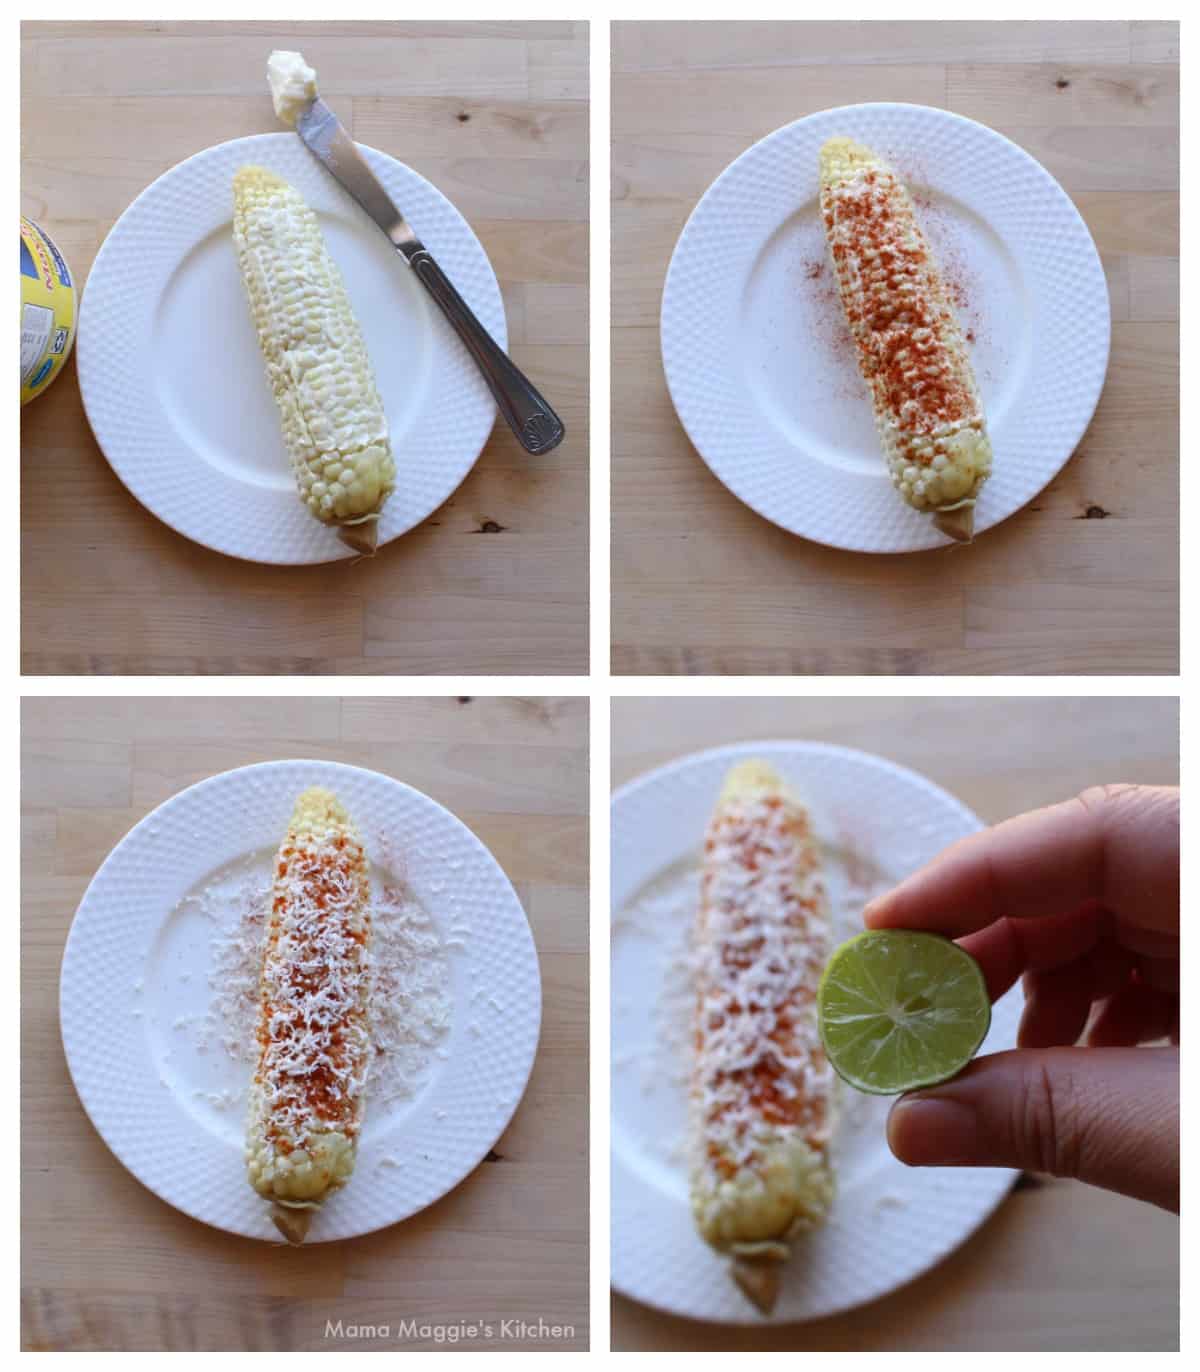 A collage showing how to make Mexican Street Corn.